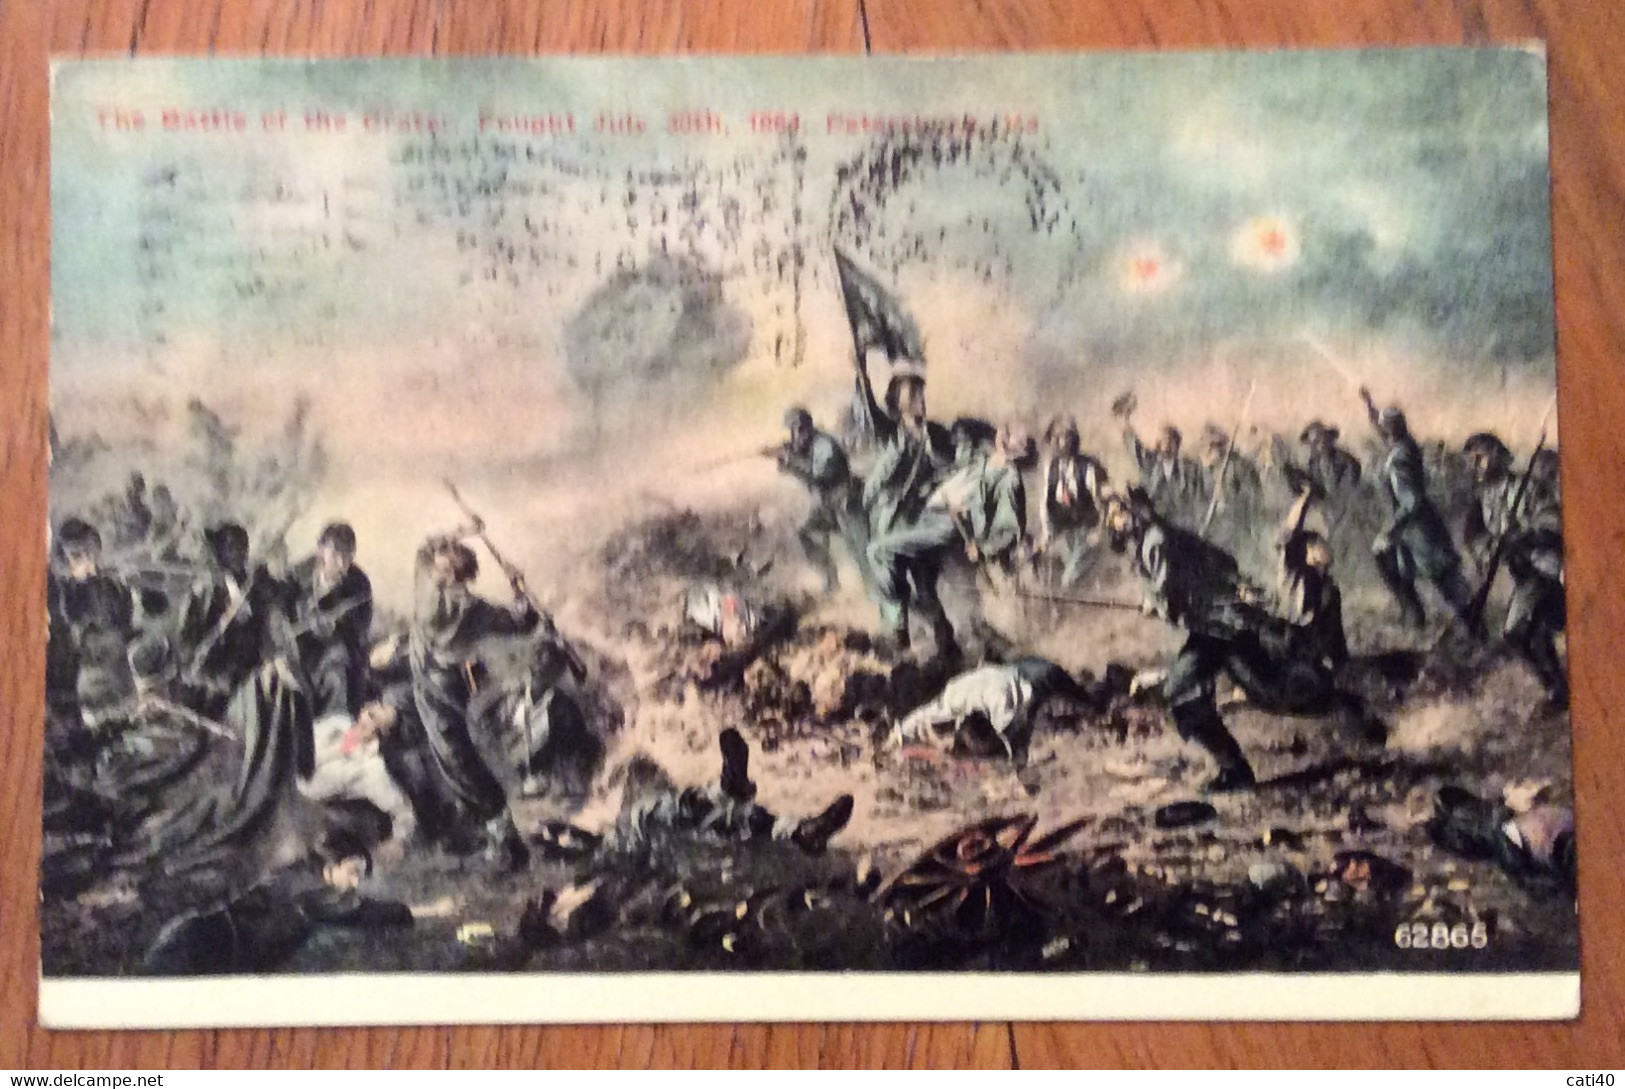 USA - MILITAR POST CARD THA BATTLE OF THE CRATER PETERSBURG  1864 - VINTAGE POST CARD  PETERSBURG 3 APR 1912 - Fall River